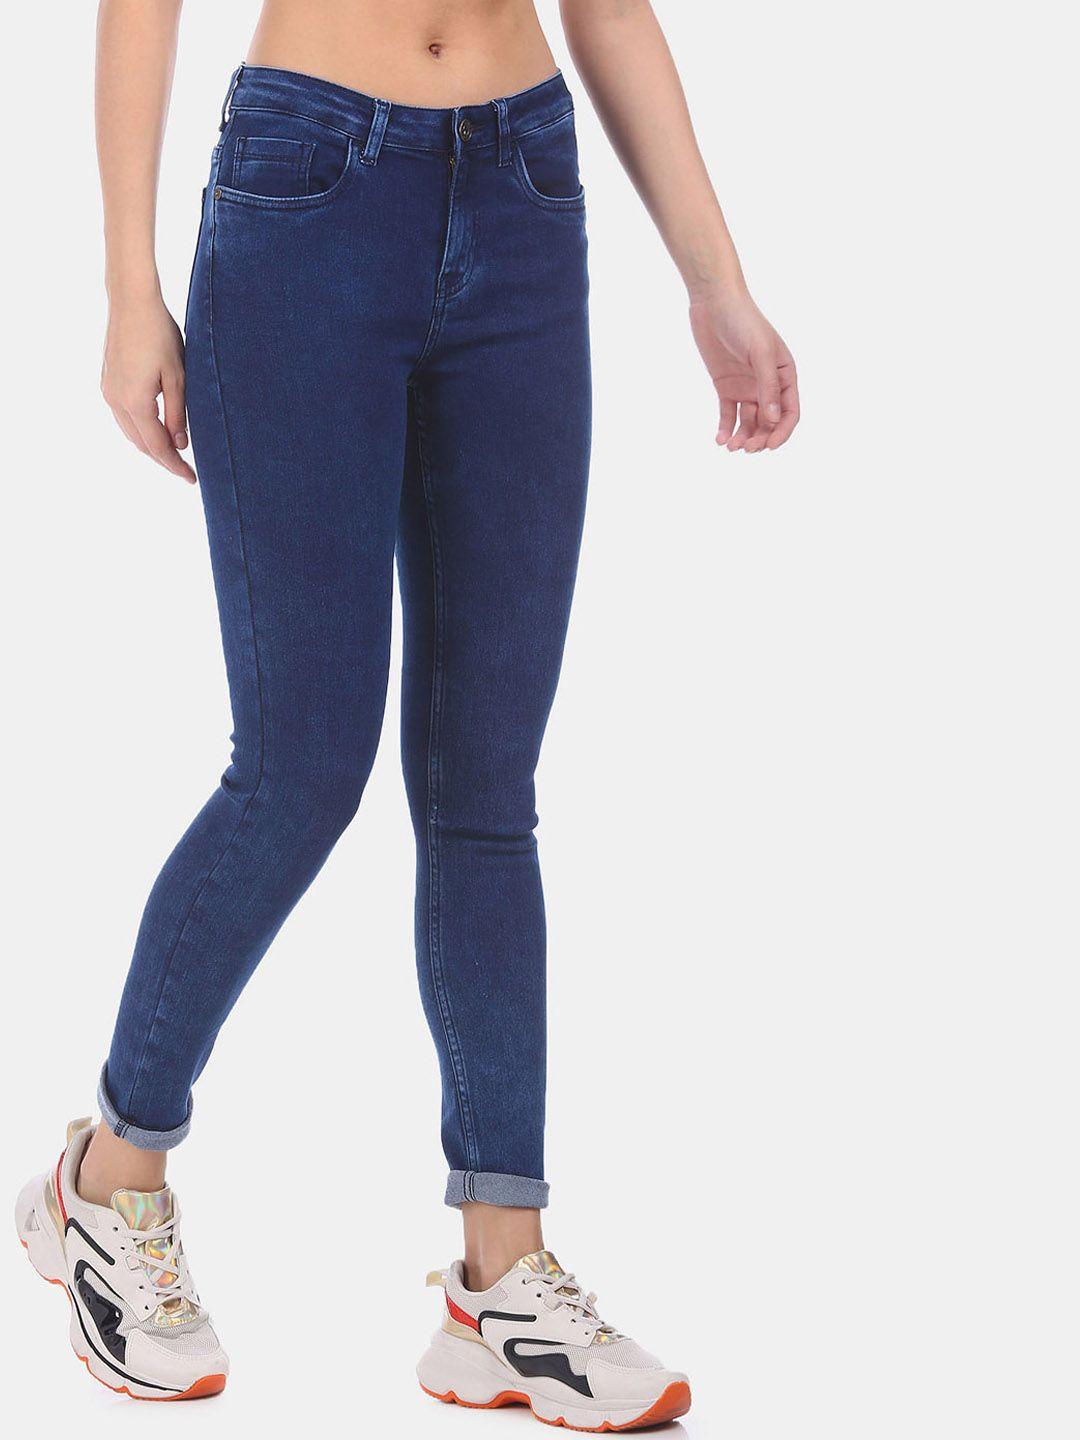 sugr-women-blue-regular-fit-mid-rise-clean-look-jeans